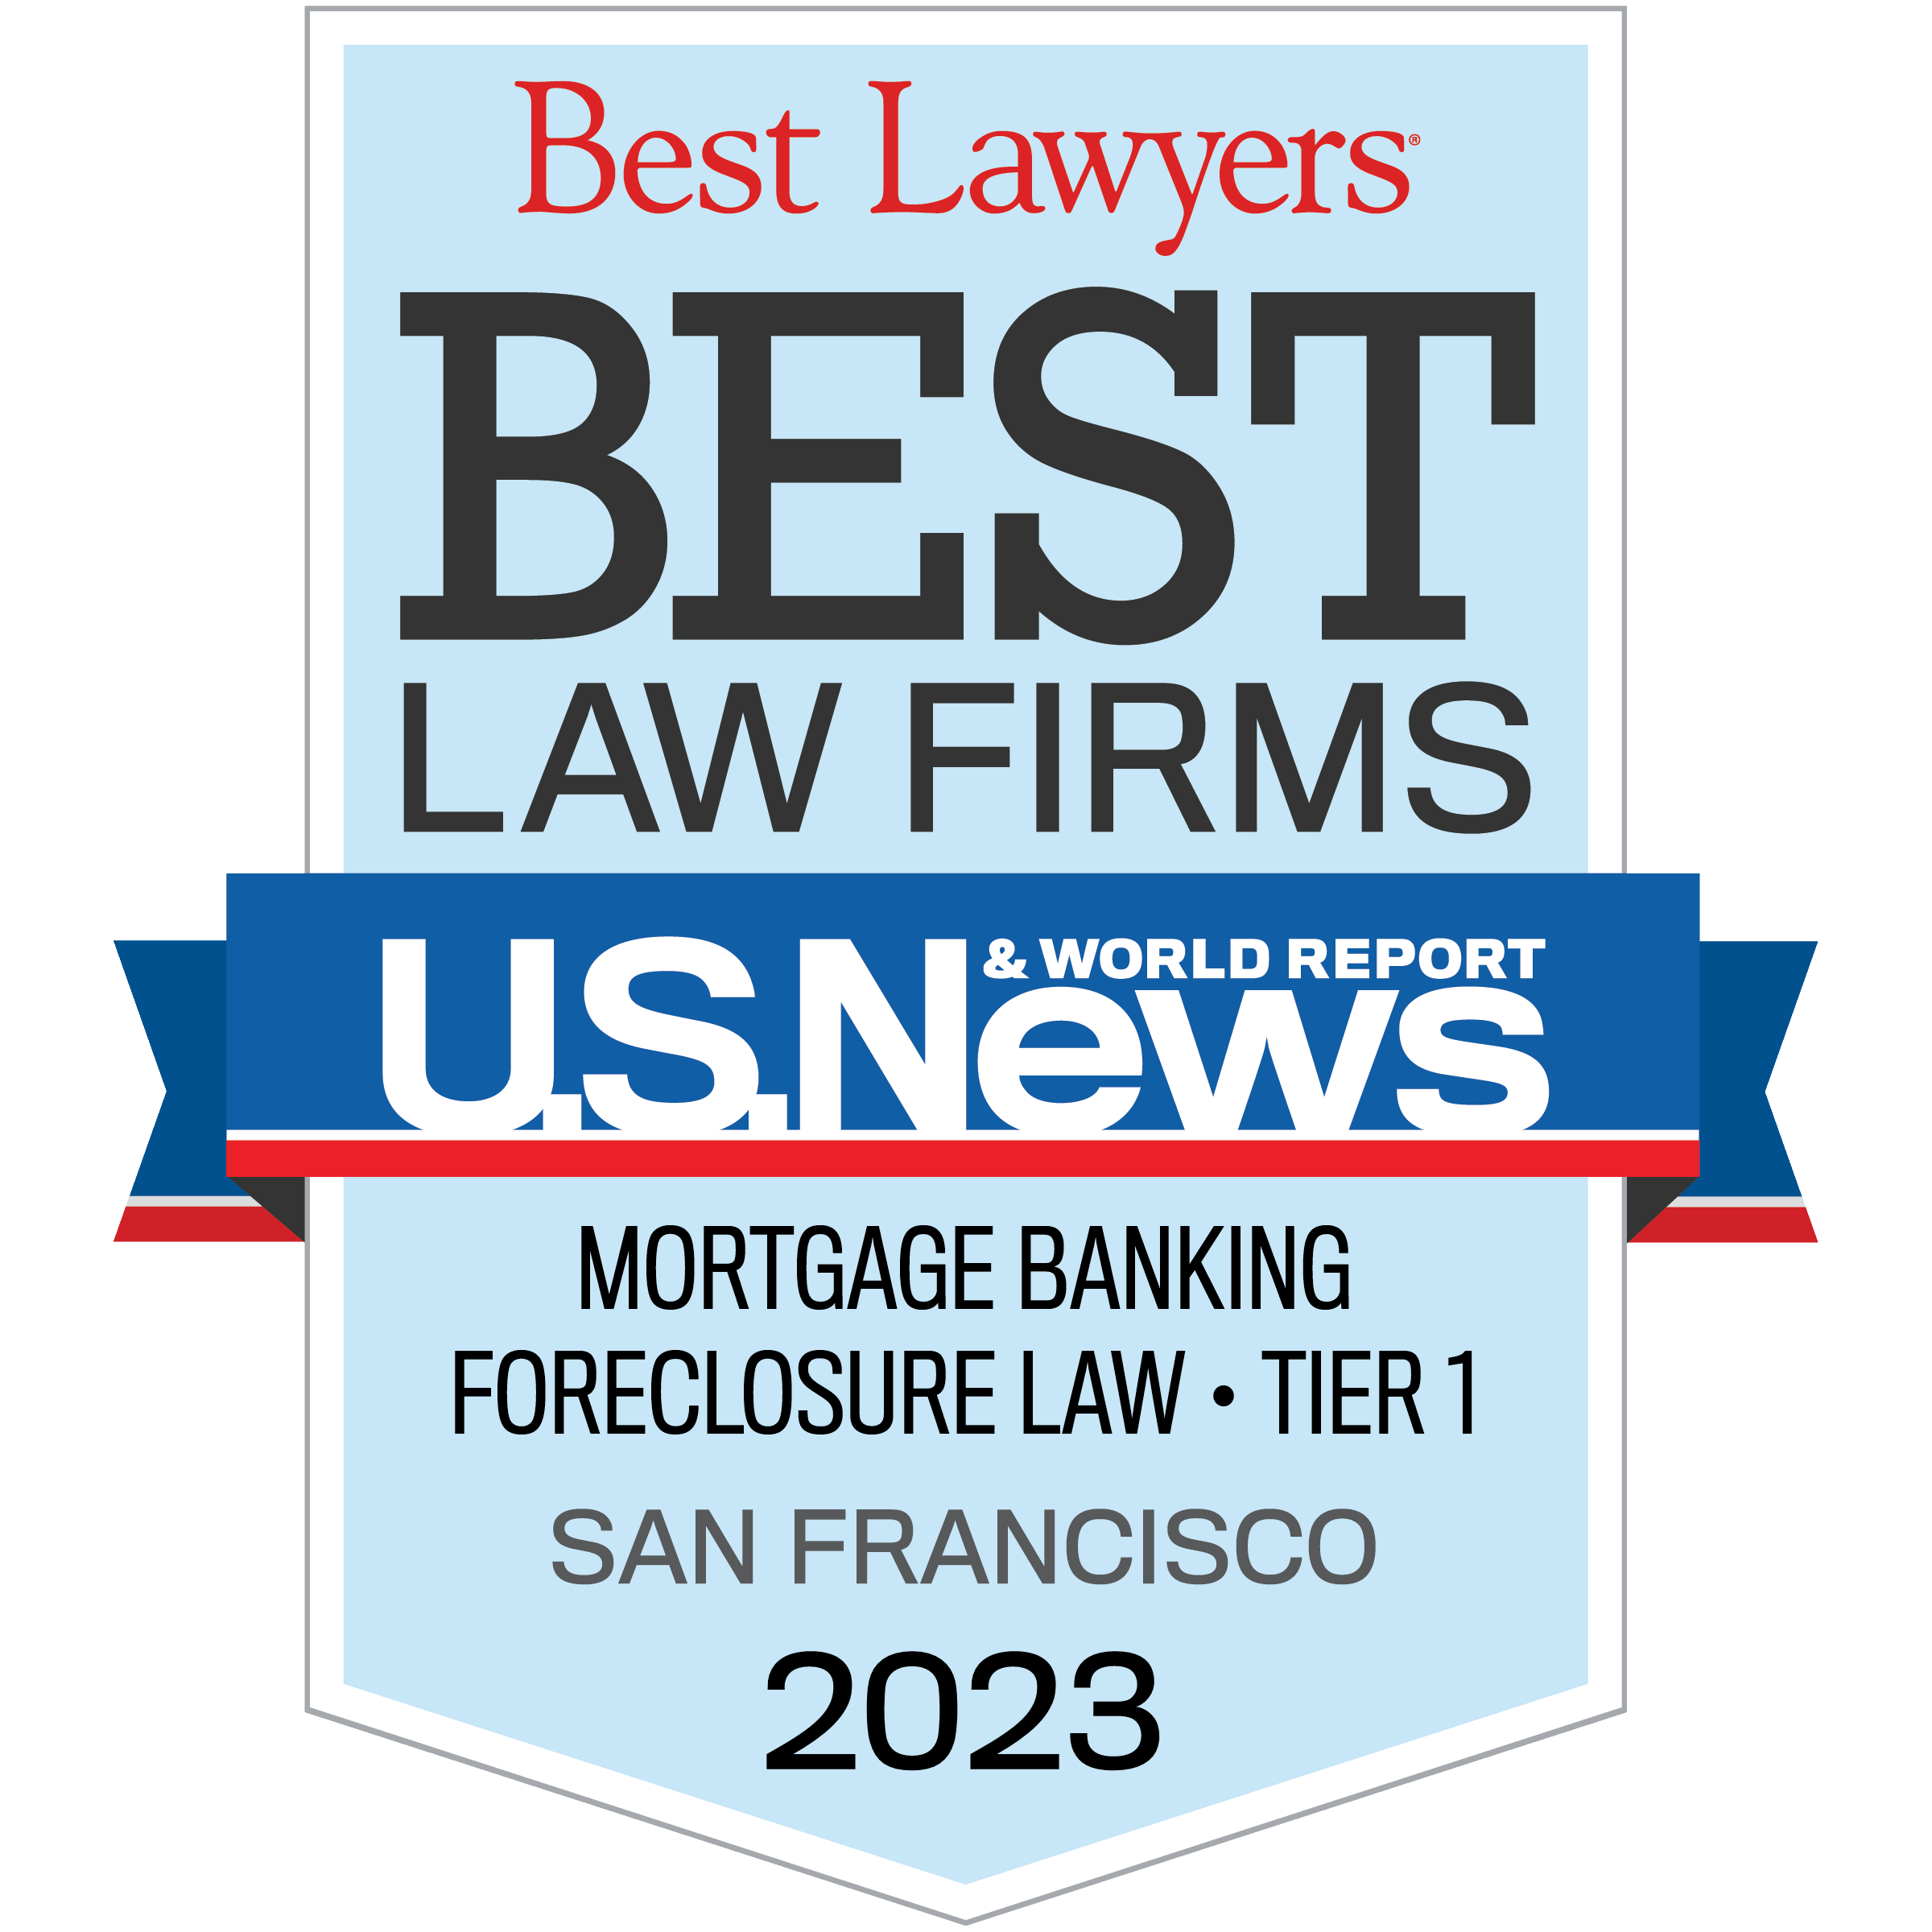 Best Lawyers - Best Law Firms - US News - Mortgage Banking Foreclosure Law - Tier 1 - San Francisco 2023